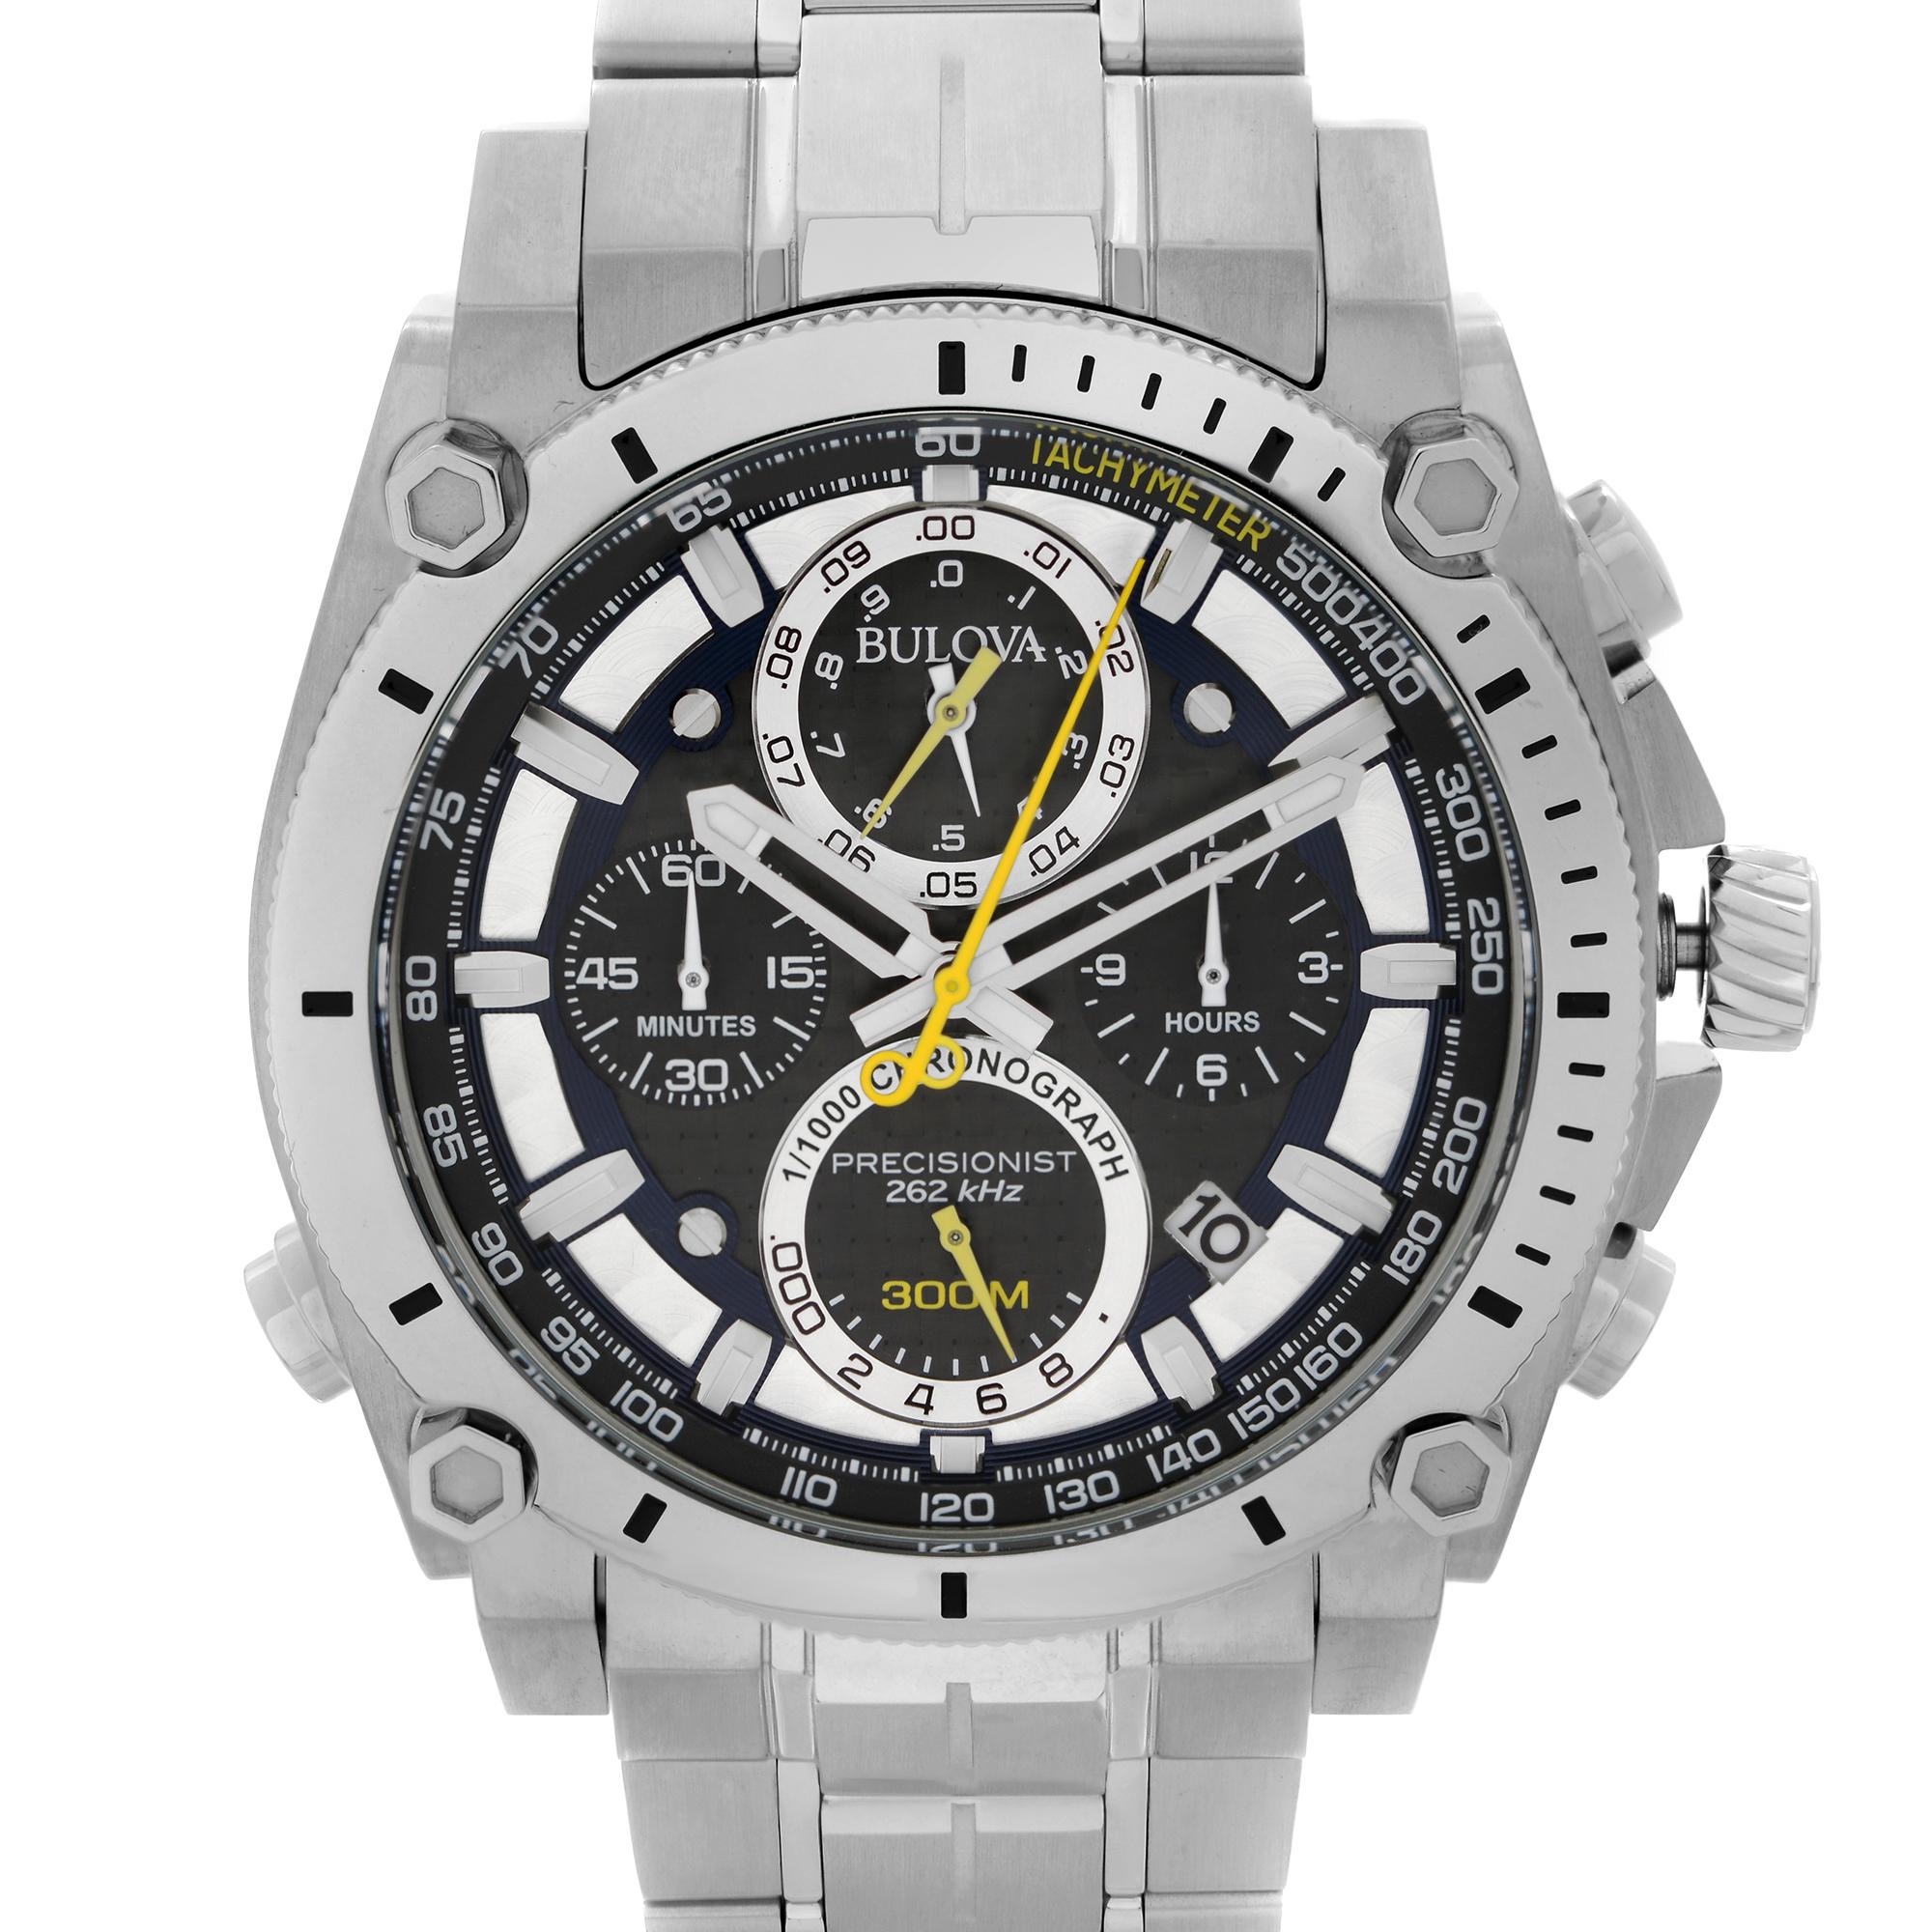 Unworn Bulova Precisionist Men's Watch 96B175. This Beautiful Timepiece is Powered by High Performance Quartz (Battery) Movement And Features: Round Stainless Steel Case & Bracelet, Fixed Stainless Steel Bezel. Black Dial with Luminous Silver-Tone